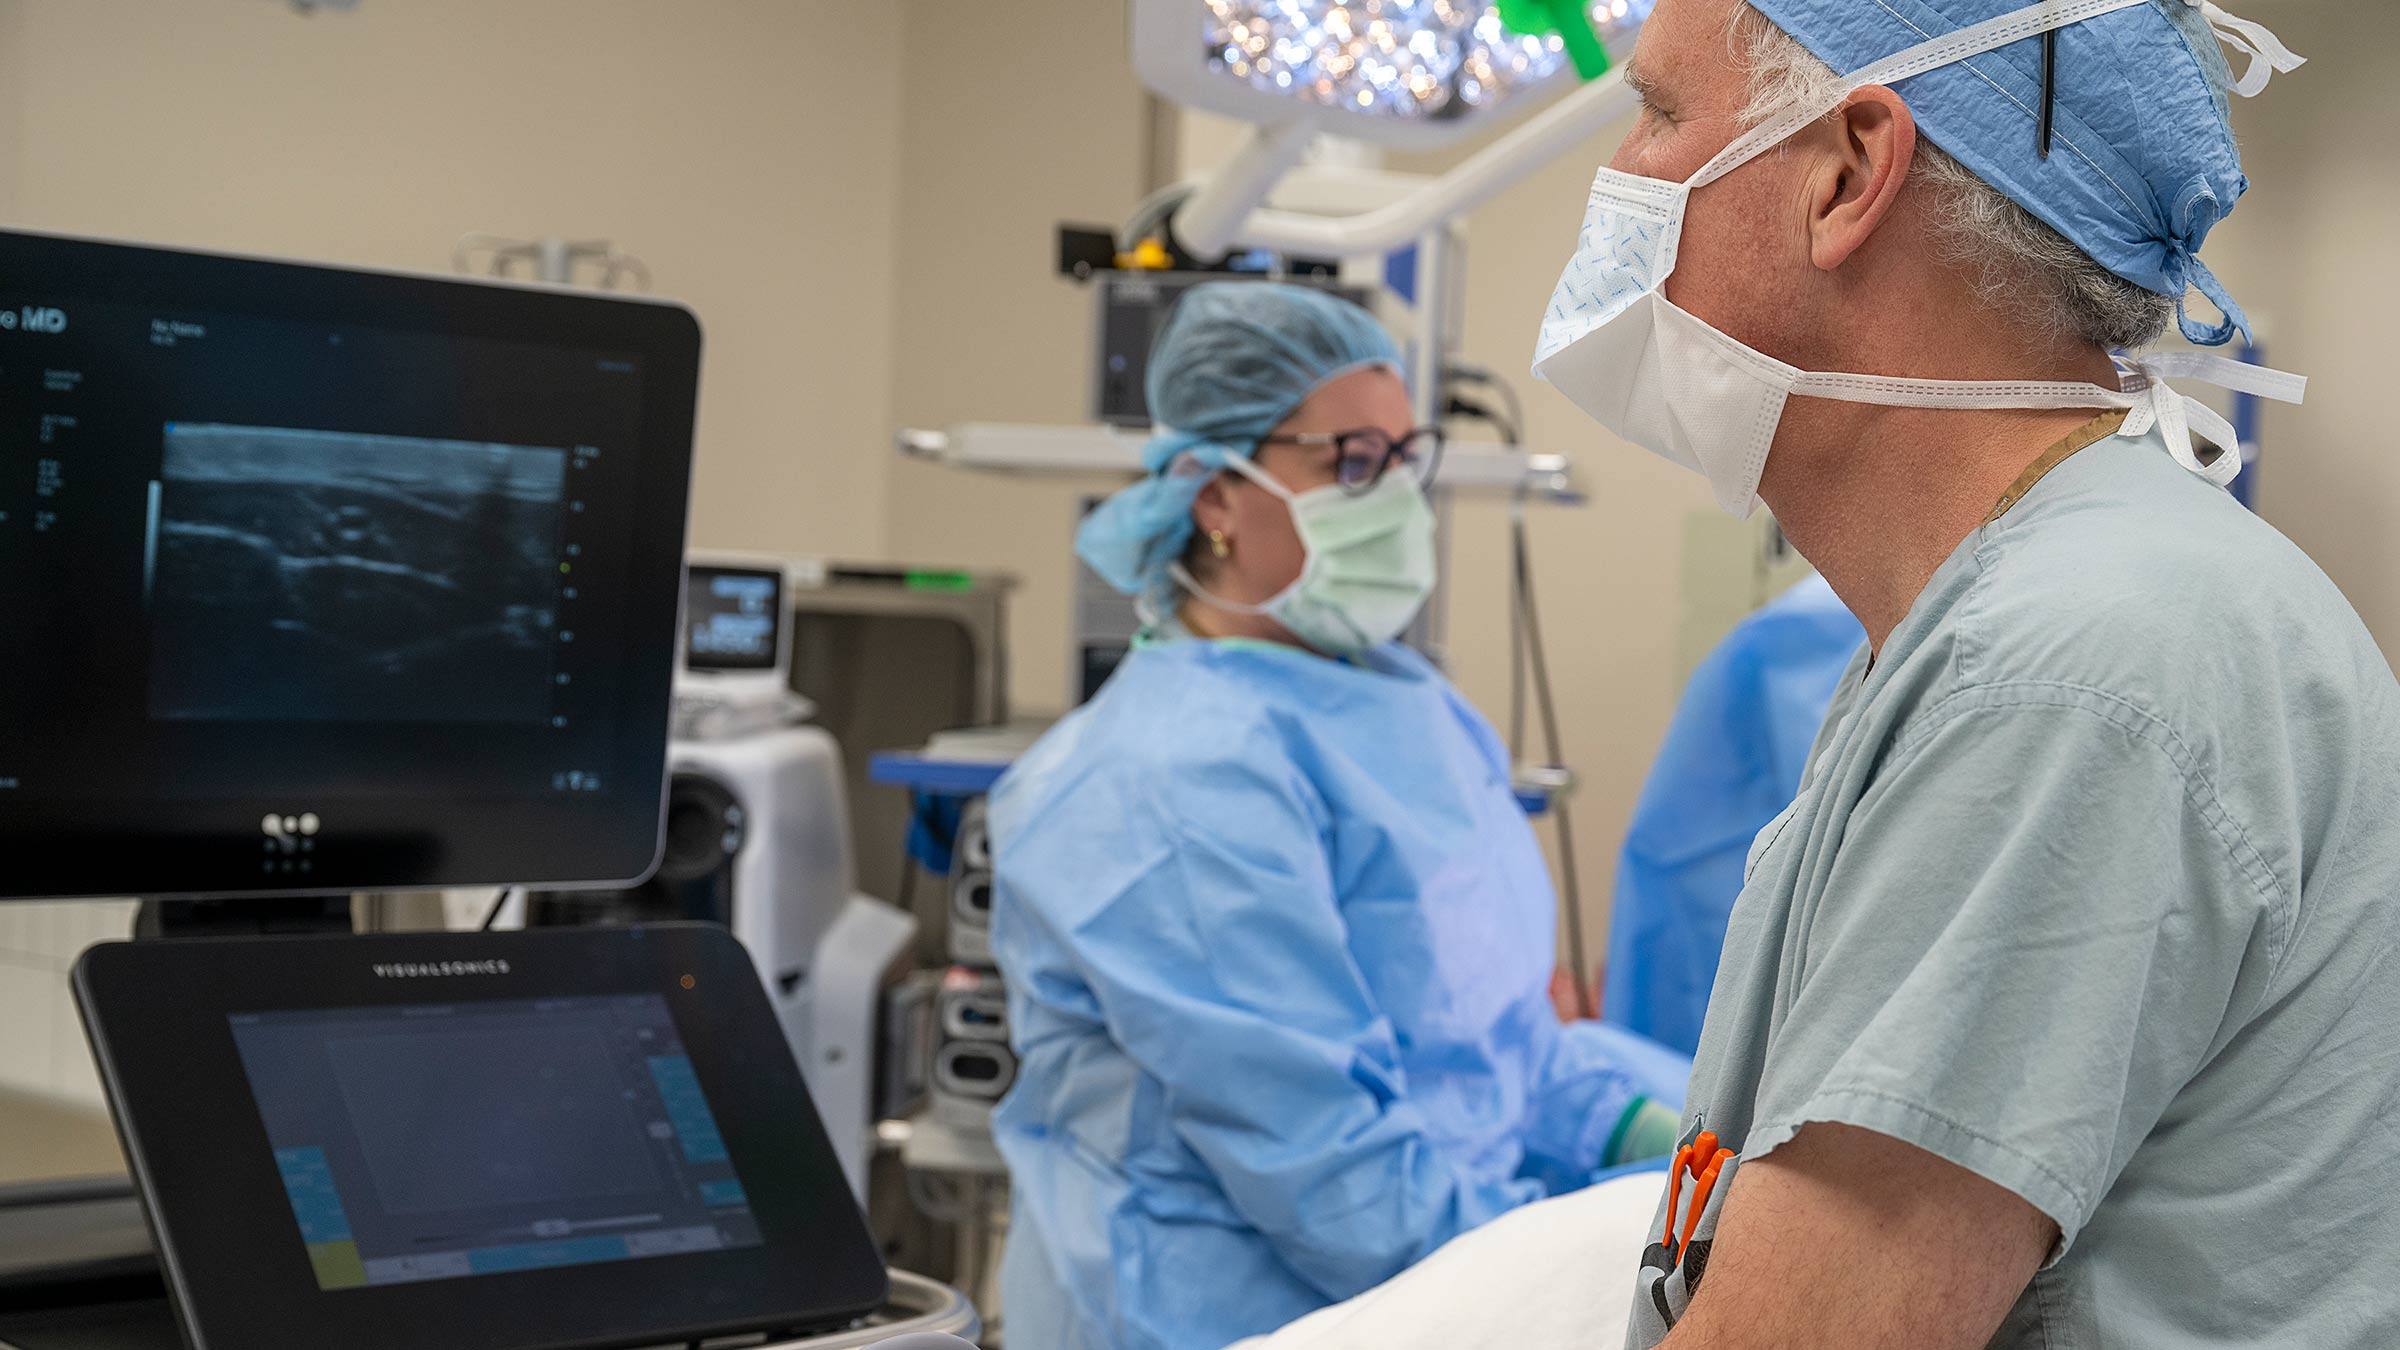 Roman Skoracki, MD, uses the Vevo MD to perform an ultra-high-frequency ultrasound to treat lymphedema in the operating room